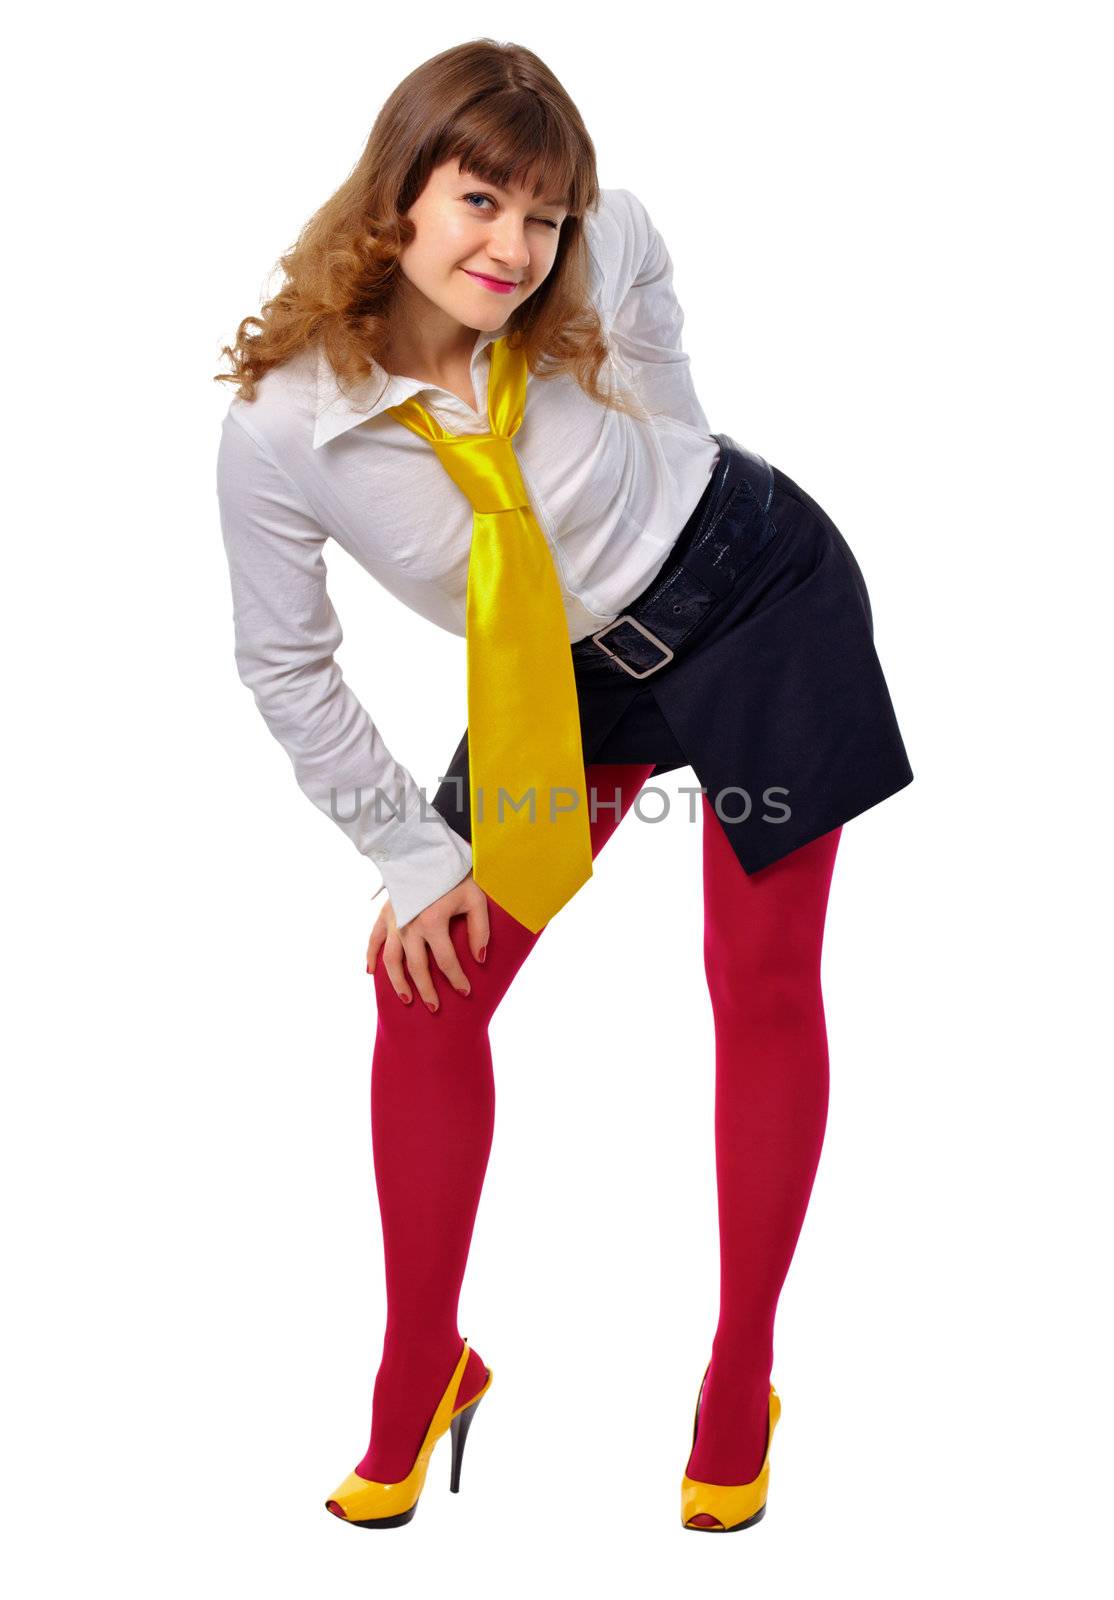 Young girl in red stockings and a yellow shoes by pzaxe